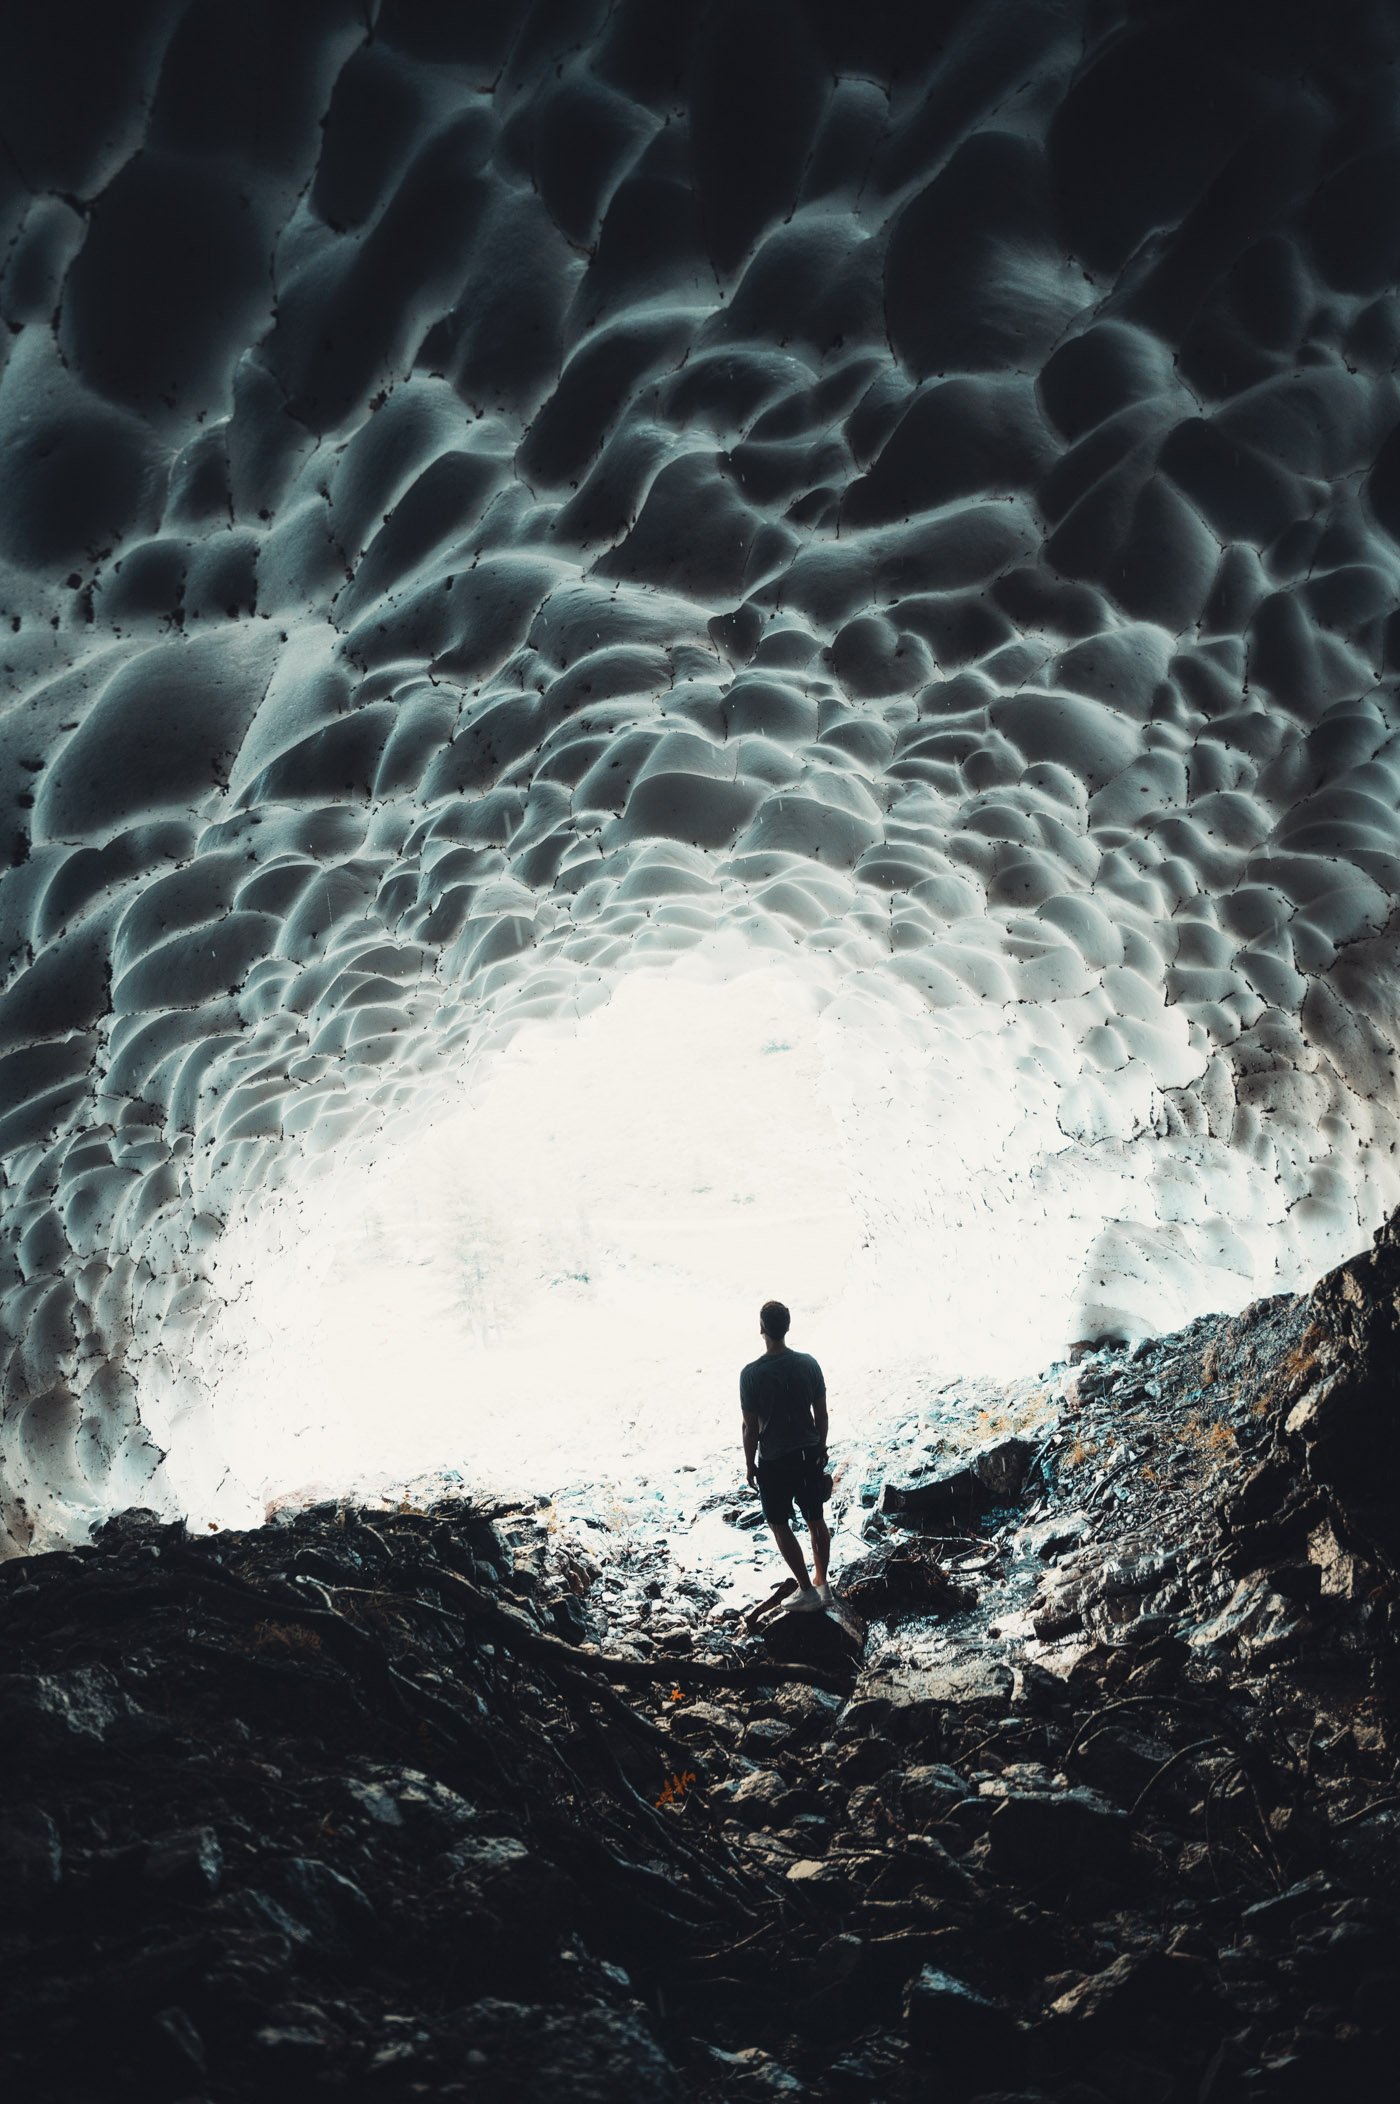 Exploring an ice cave in East Tyrol - part of mindful mountain experiences